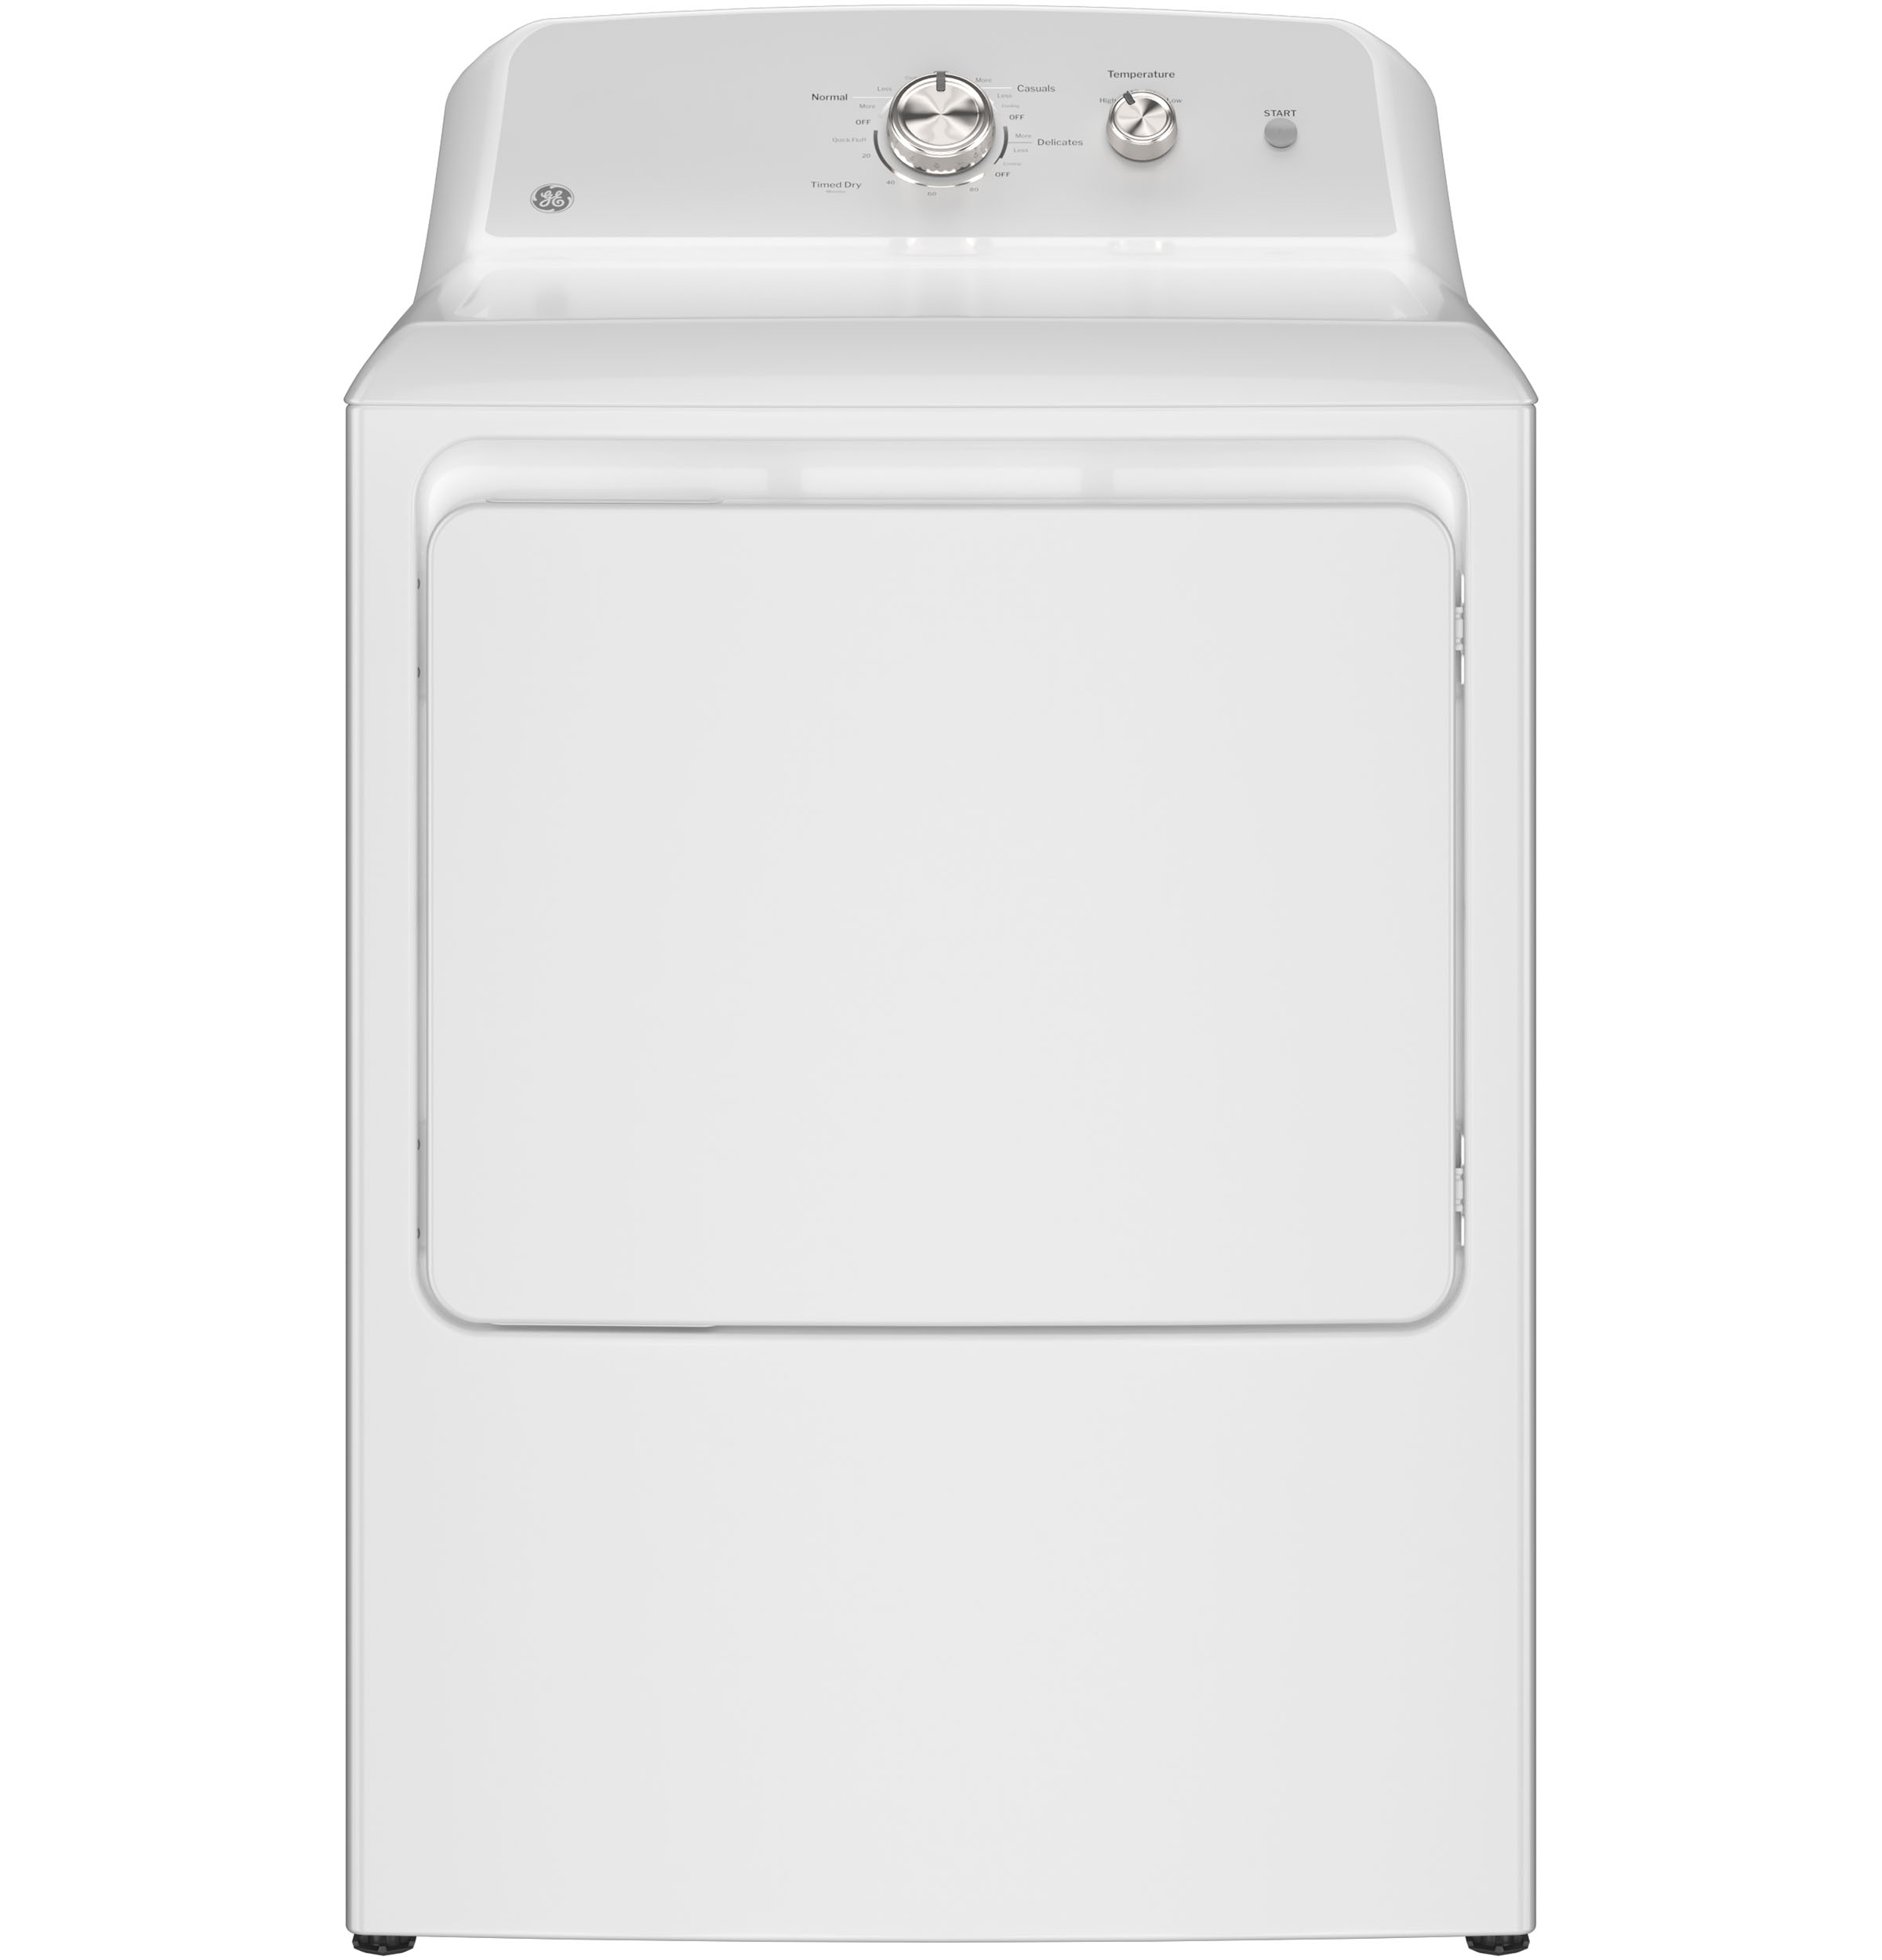 GE® 7.2 cu. ft. Capacity Electric Dryer with Up To 120 ft. Venting​ and Reversible Door​